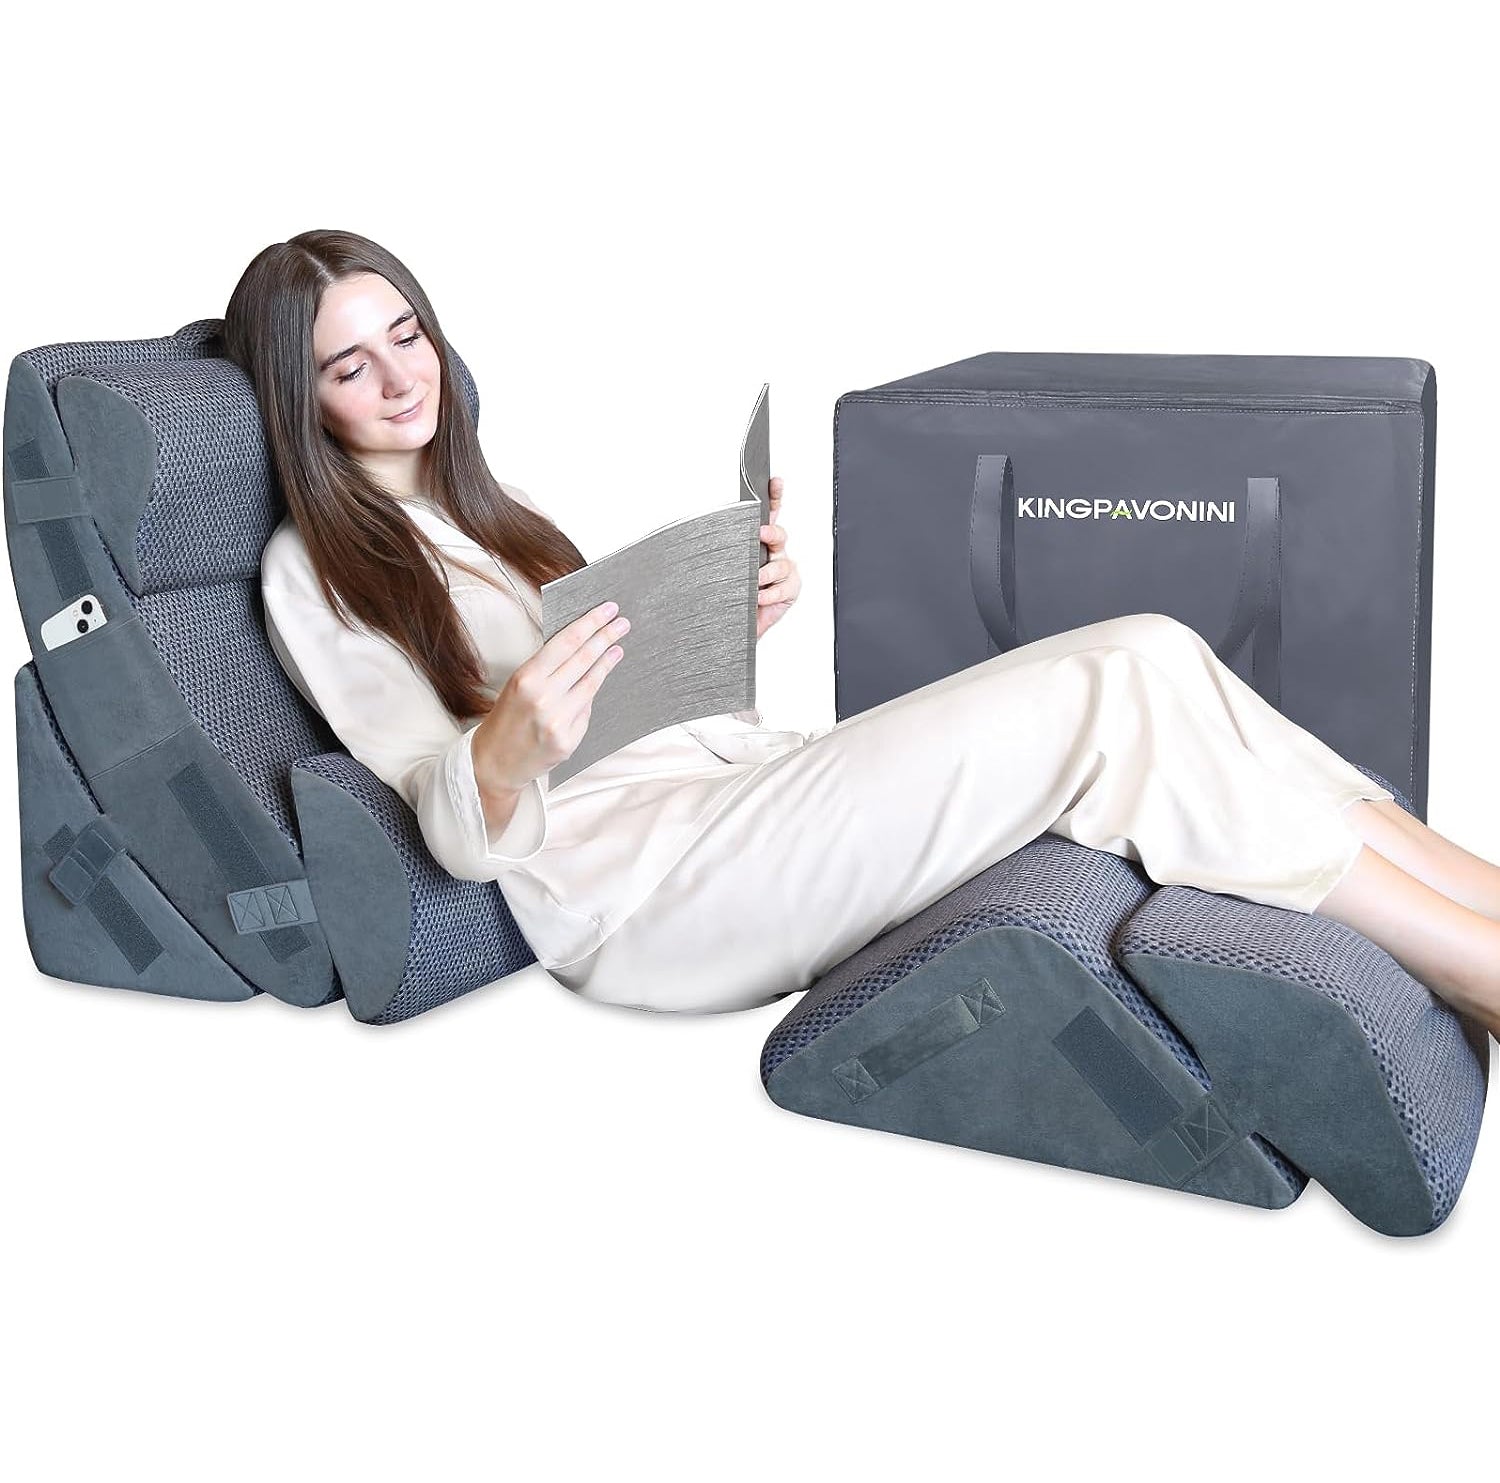 Large Leg Lifter Wedge Pillow - Discontinued